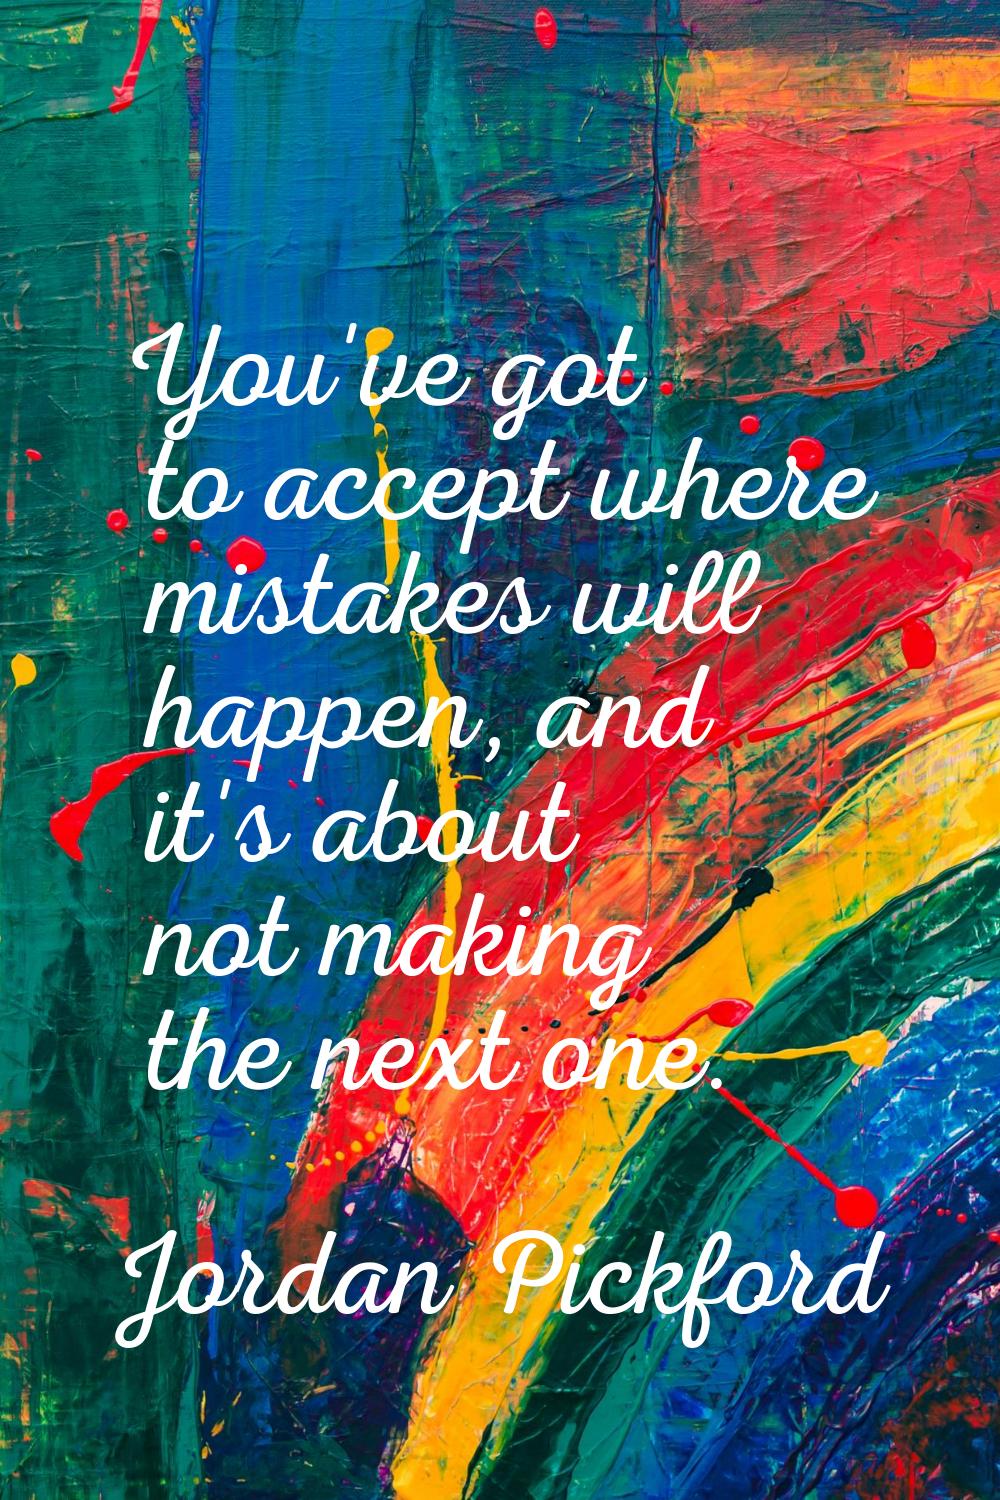 You've got to accept where mistakes will happen, and it's about not making the next one.